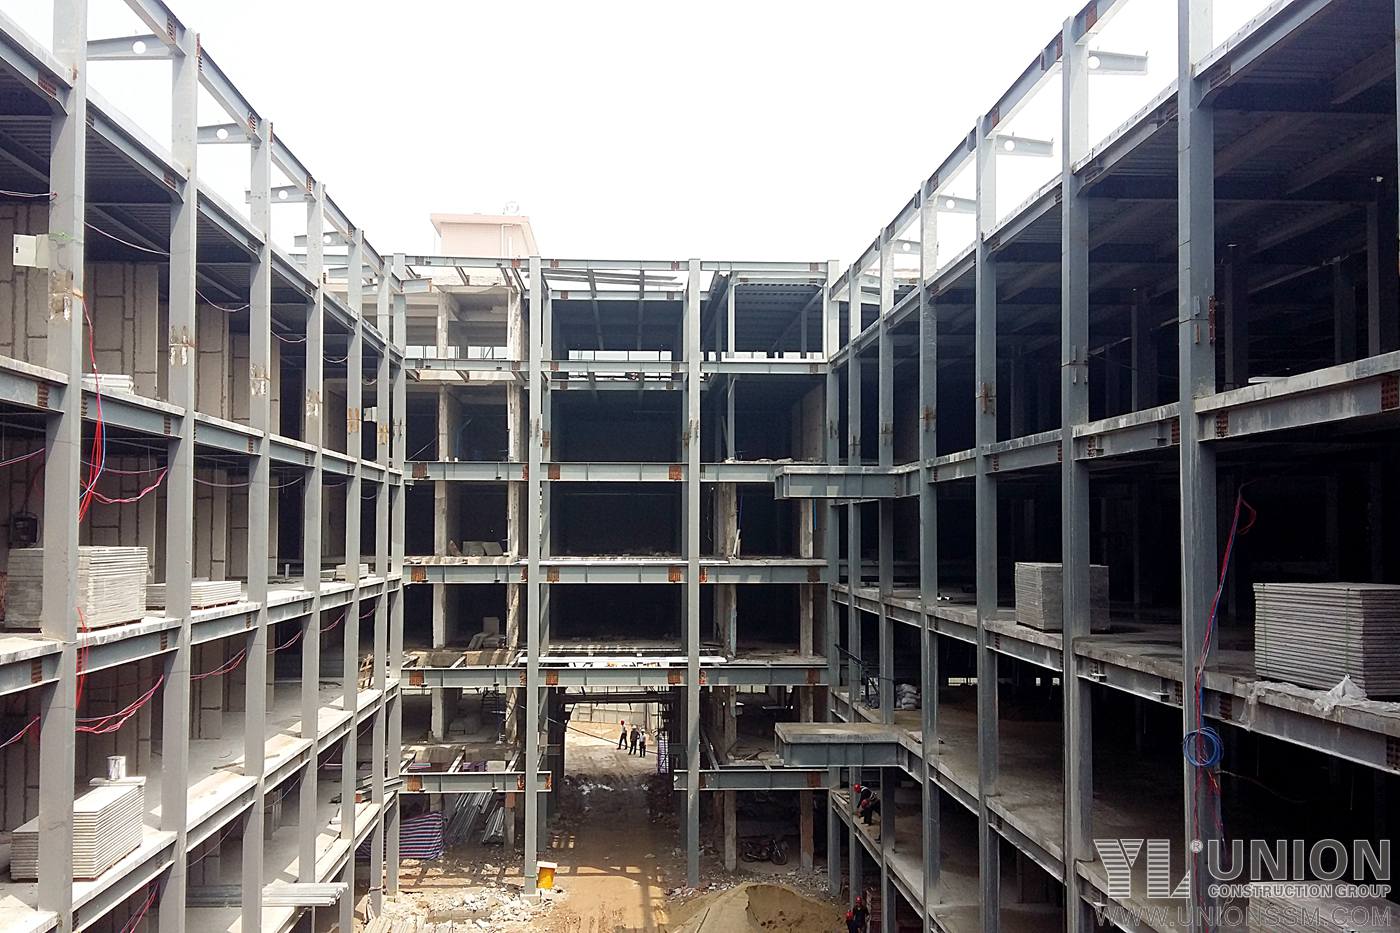 6 Floors steel structure shopping mall-30,000sqm.